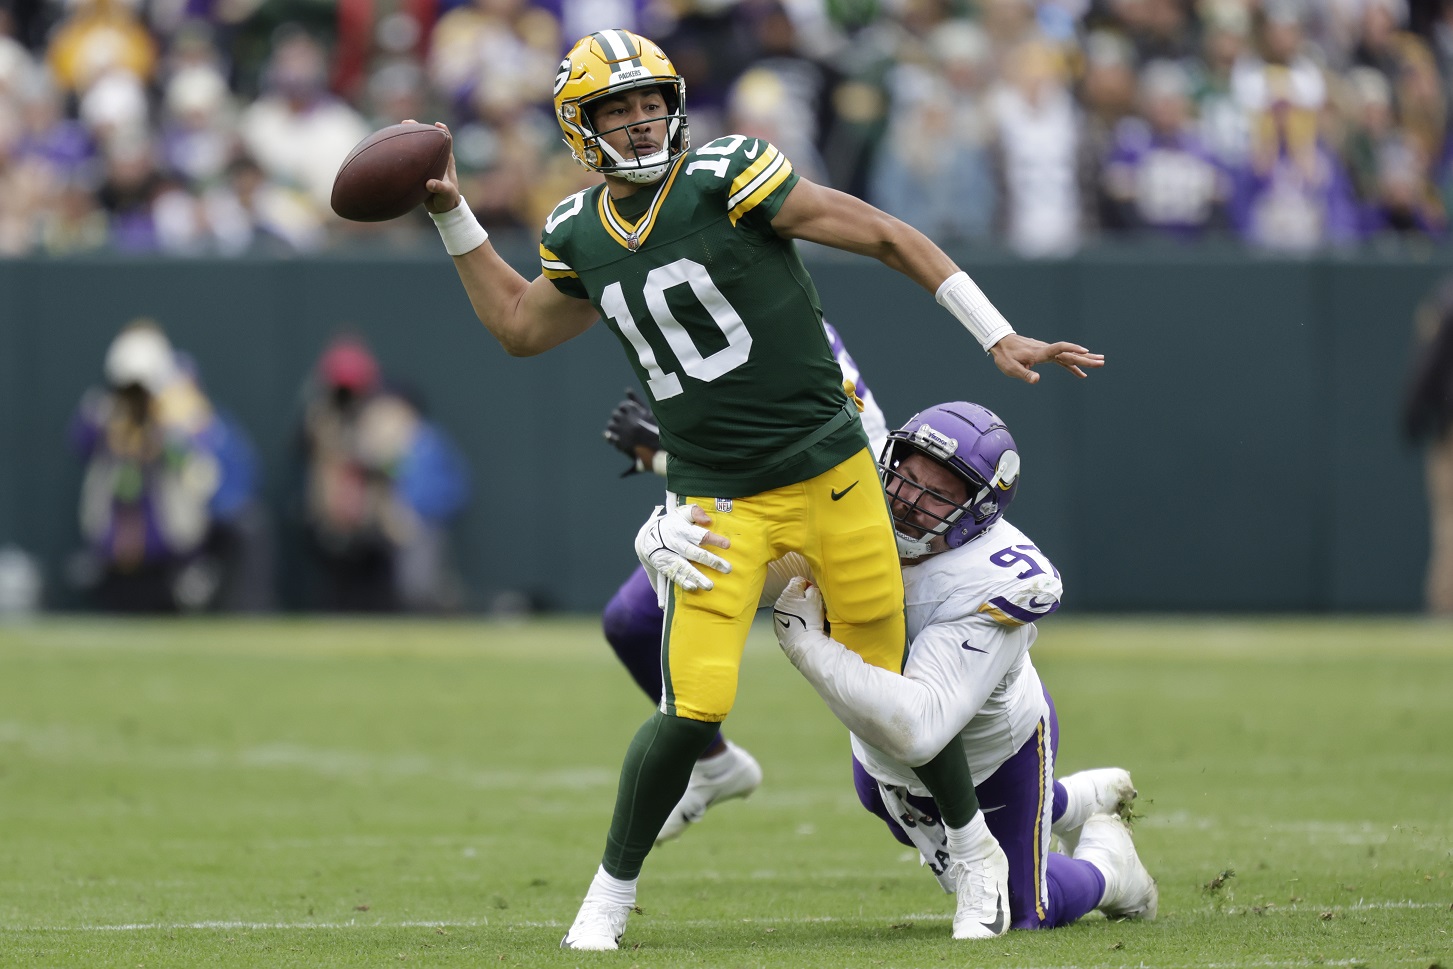 Packers’ first-half struggles on offense now carrying over to the second half